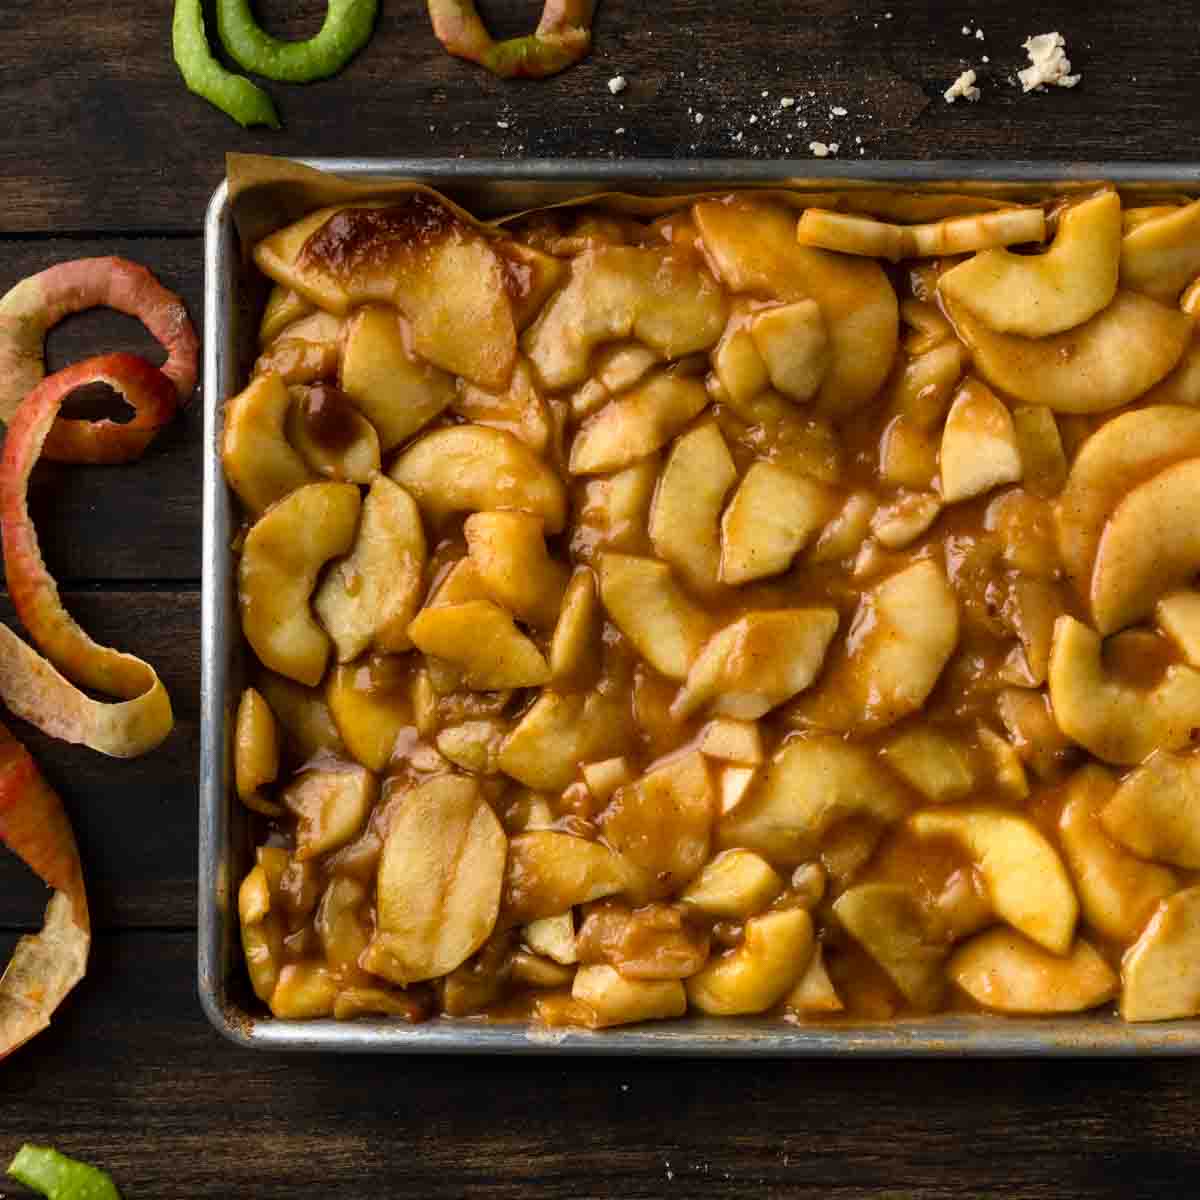 Cooked apple pie filling chilling on a quarter sheet tray